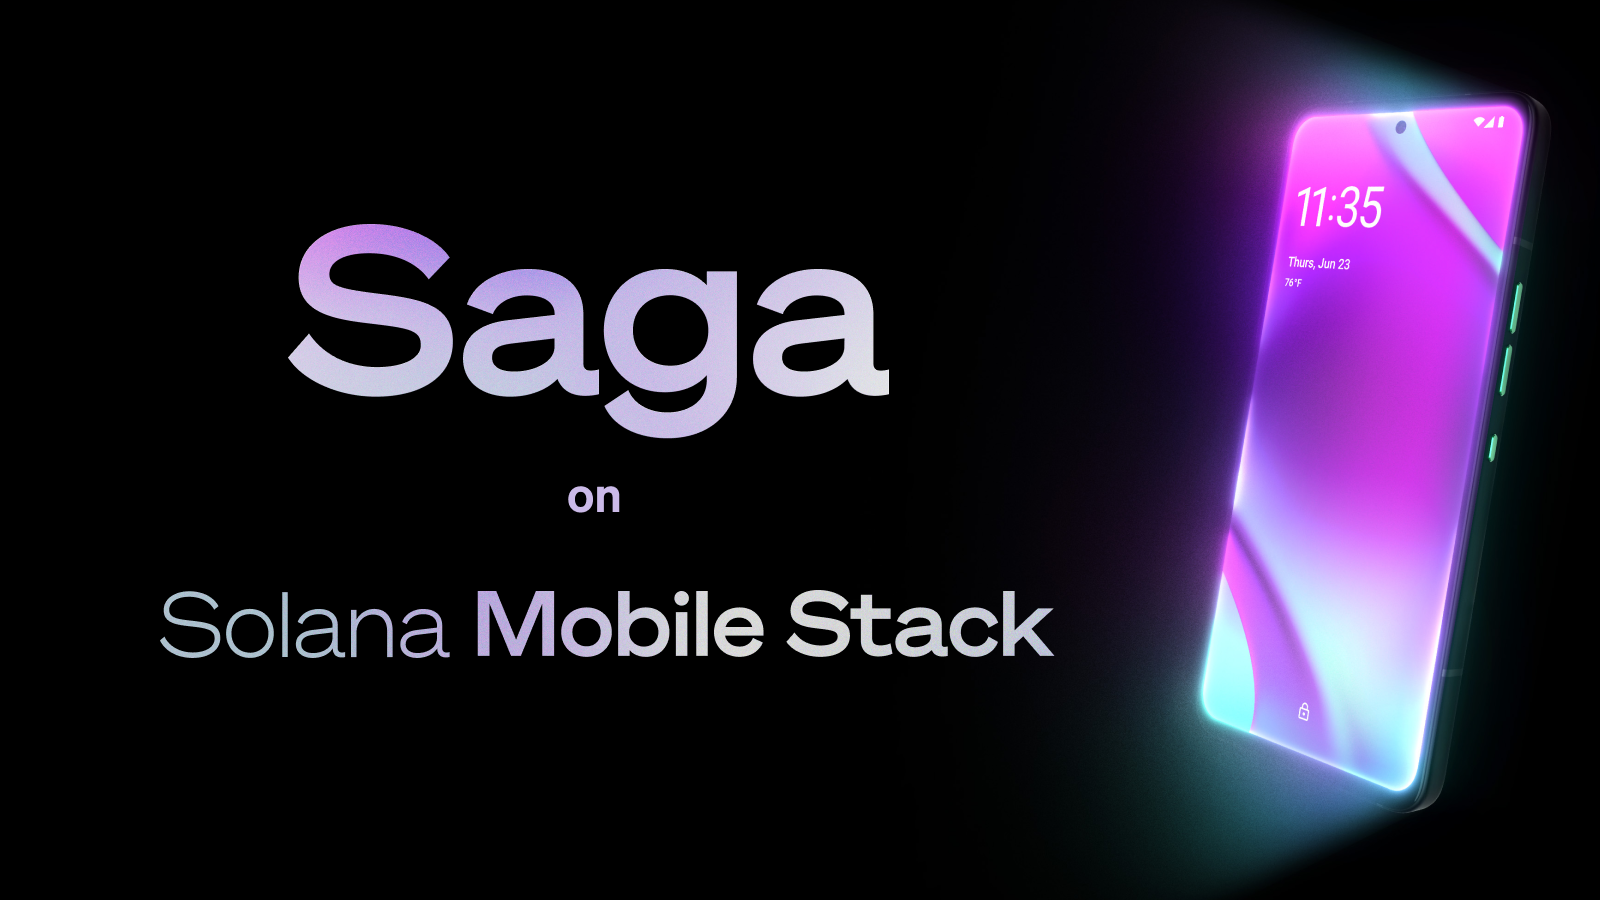 Solana Mobile Stack and flagship device, Saga, changes everything